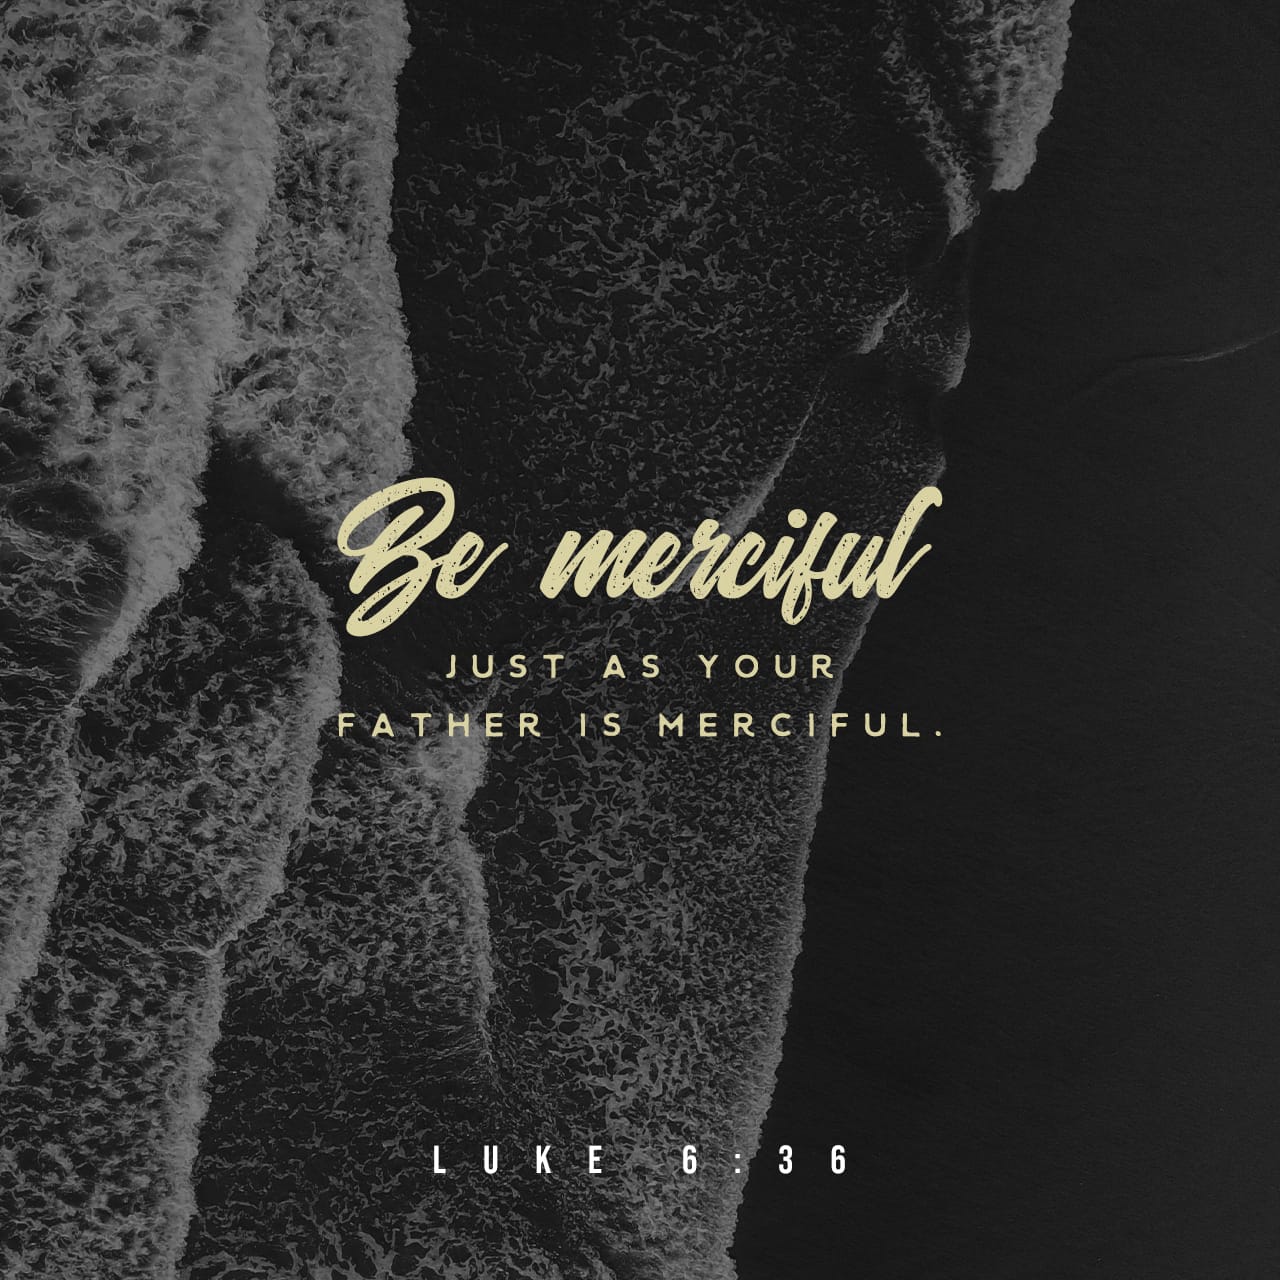 Luke 6:36-38 Be merciful, even as your Father is merciful. “Judge not, and  you will not be judged; condemn not, and you will not be condemned;  forgive, and you will be forgiven;